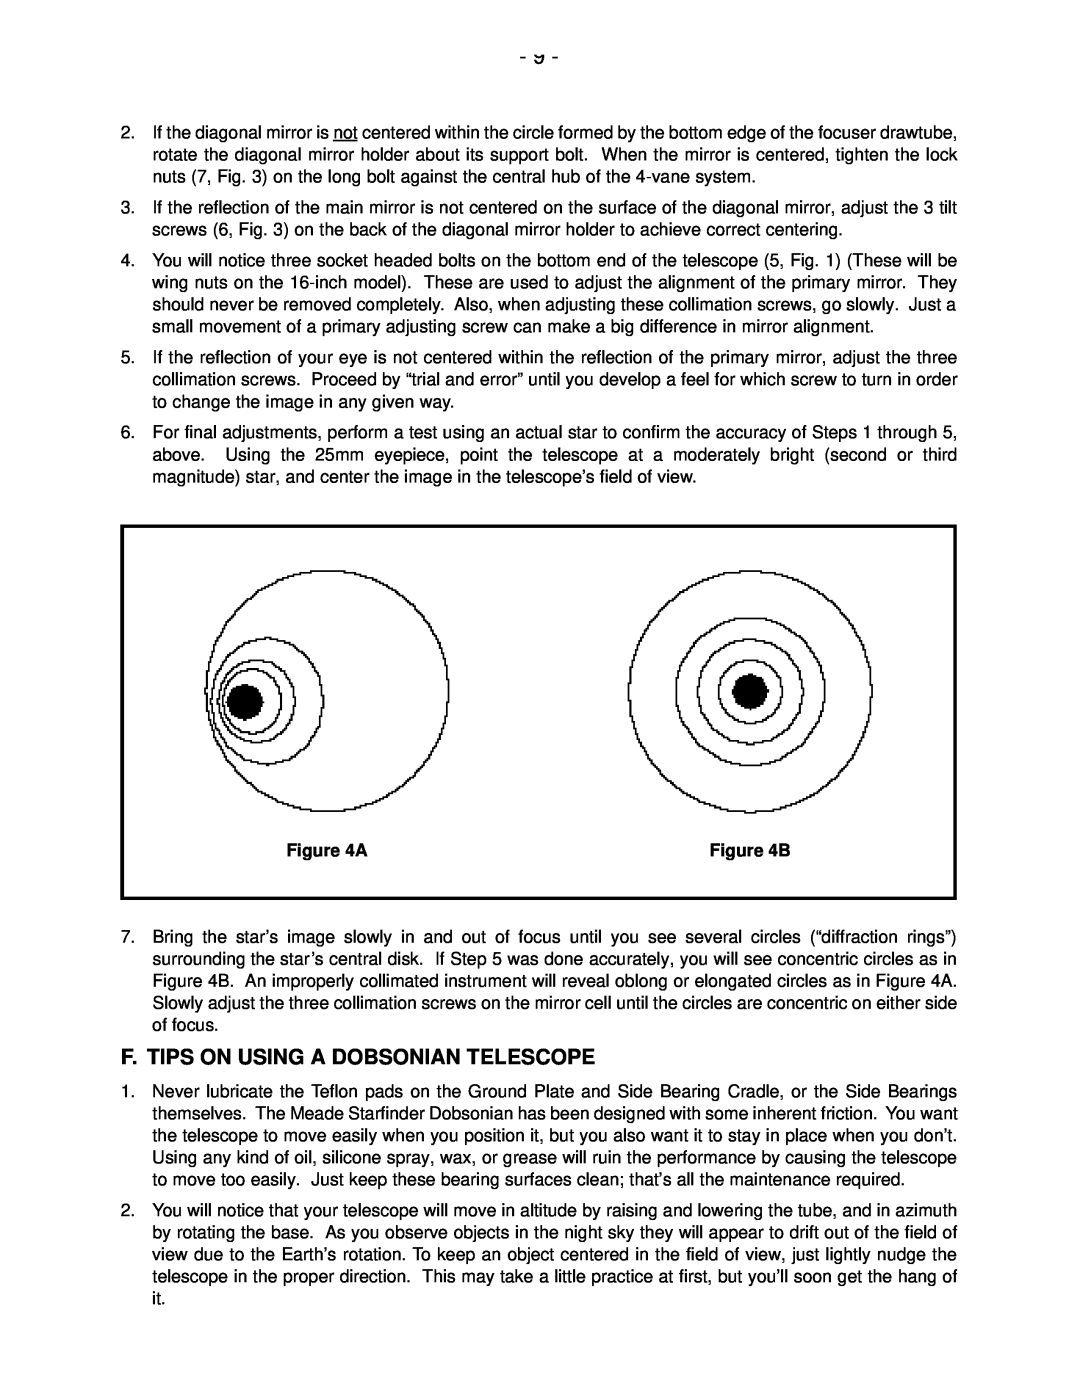 Meade 16 instruction manual F. Tips On Using A Dobsonian Telescope, B 